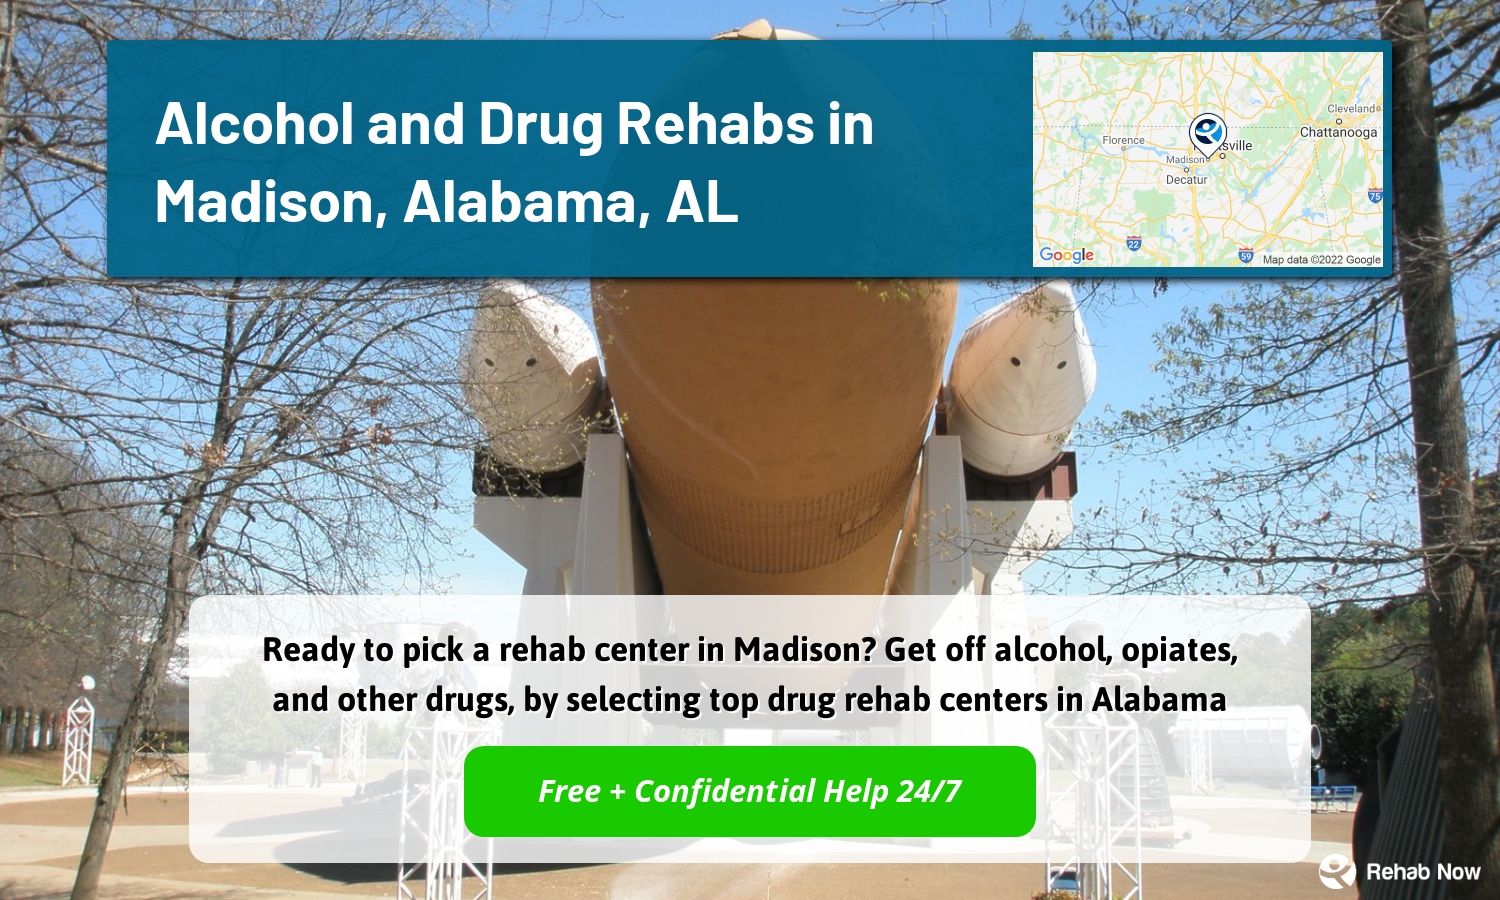 Ready to pick a rehab center in Madison? Get off alcohol, opiates, and other drugs, by selecting top drug rehab centers in Alabama